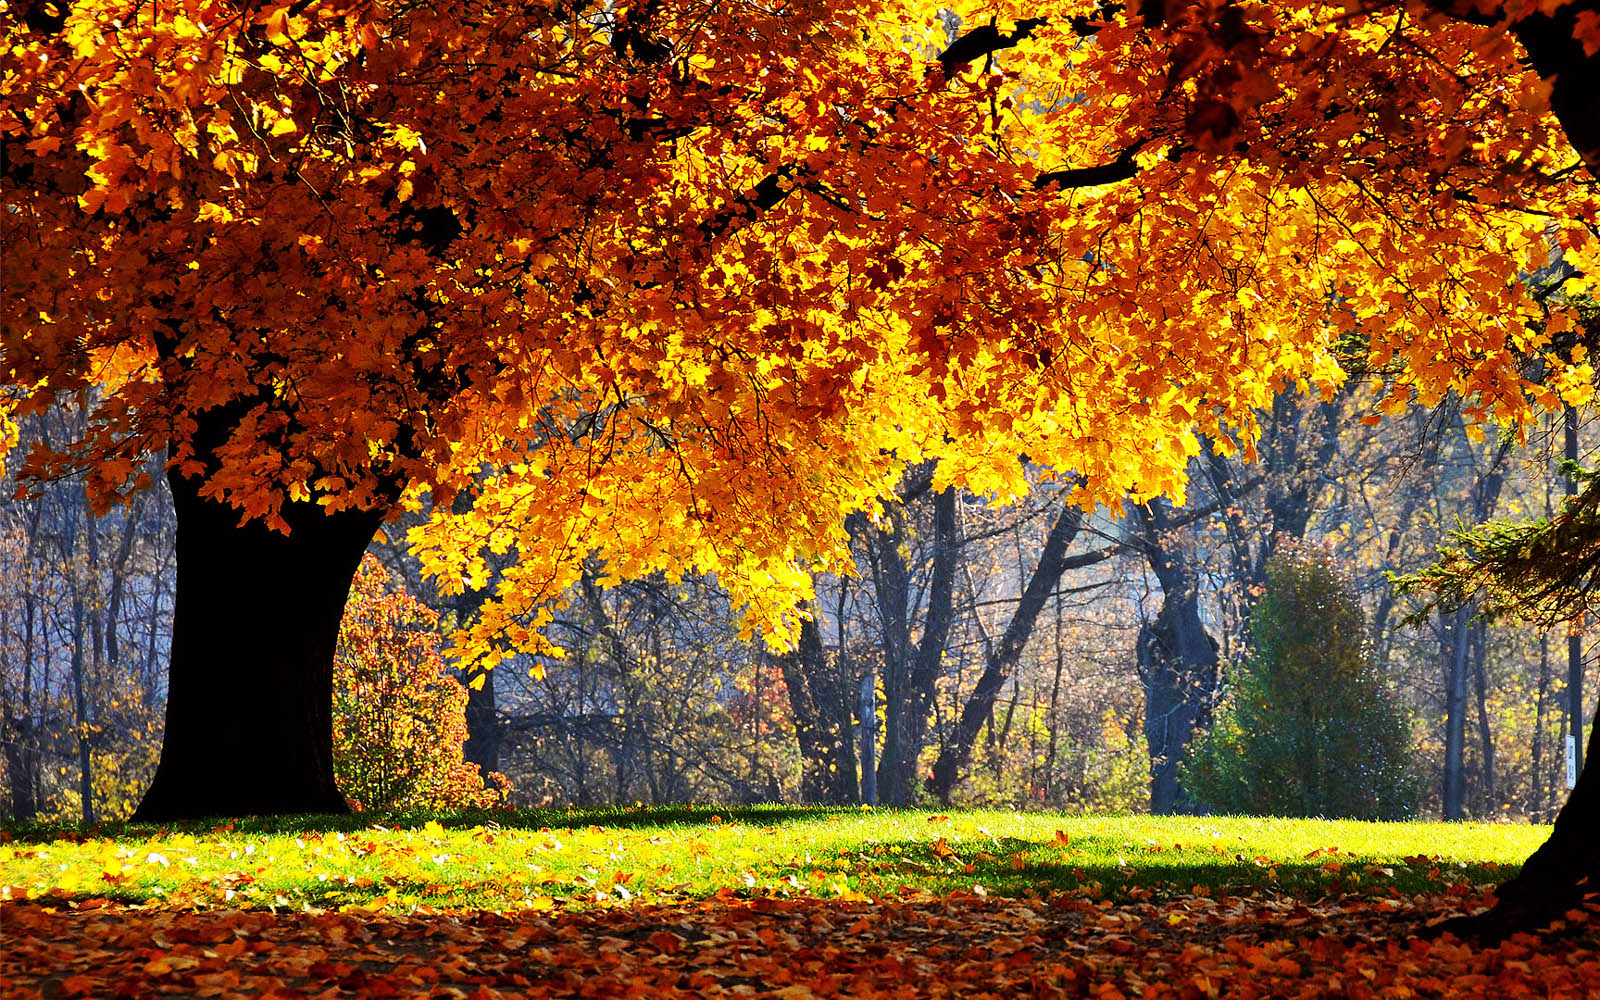 Tag Beautiful Autumn Scenery WallpapersBackgrounds Photos Images 1600x1000